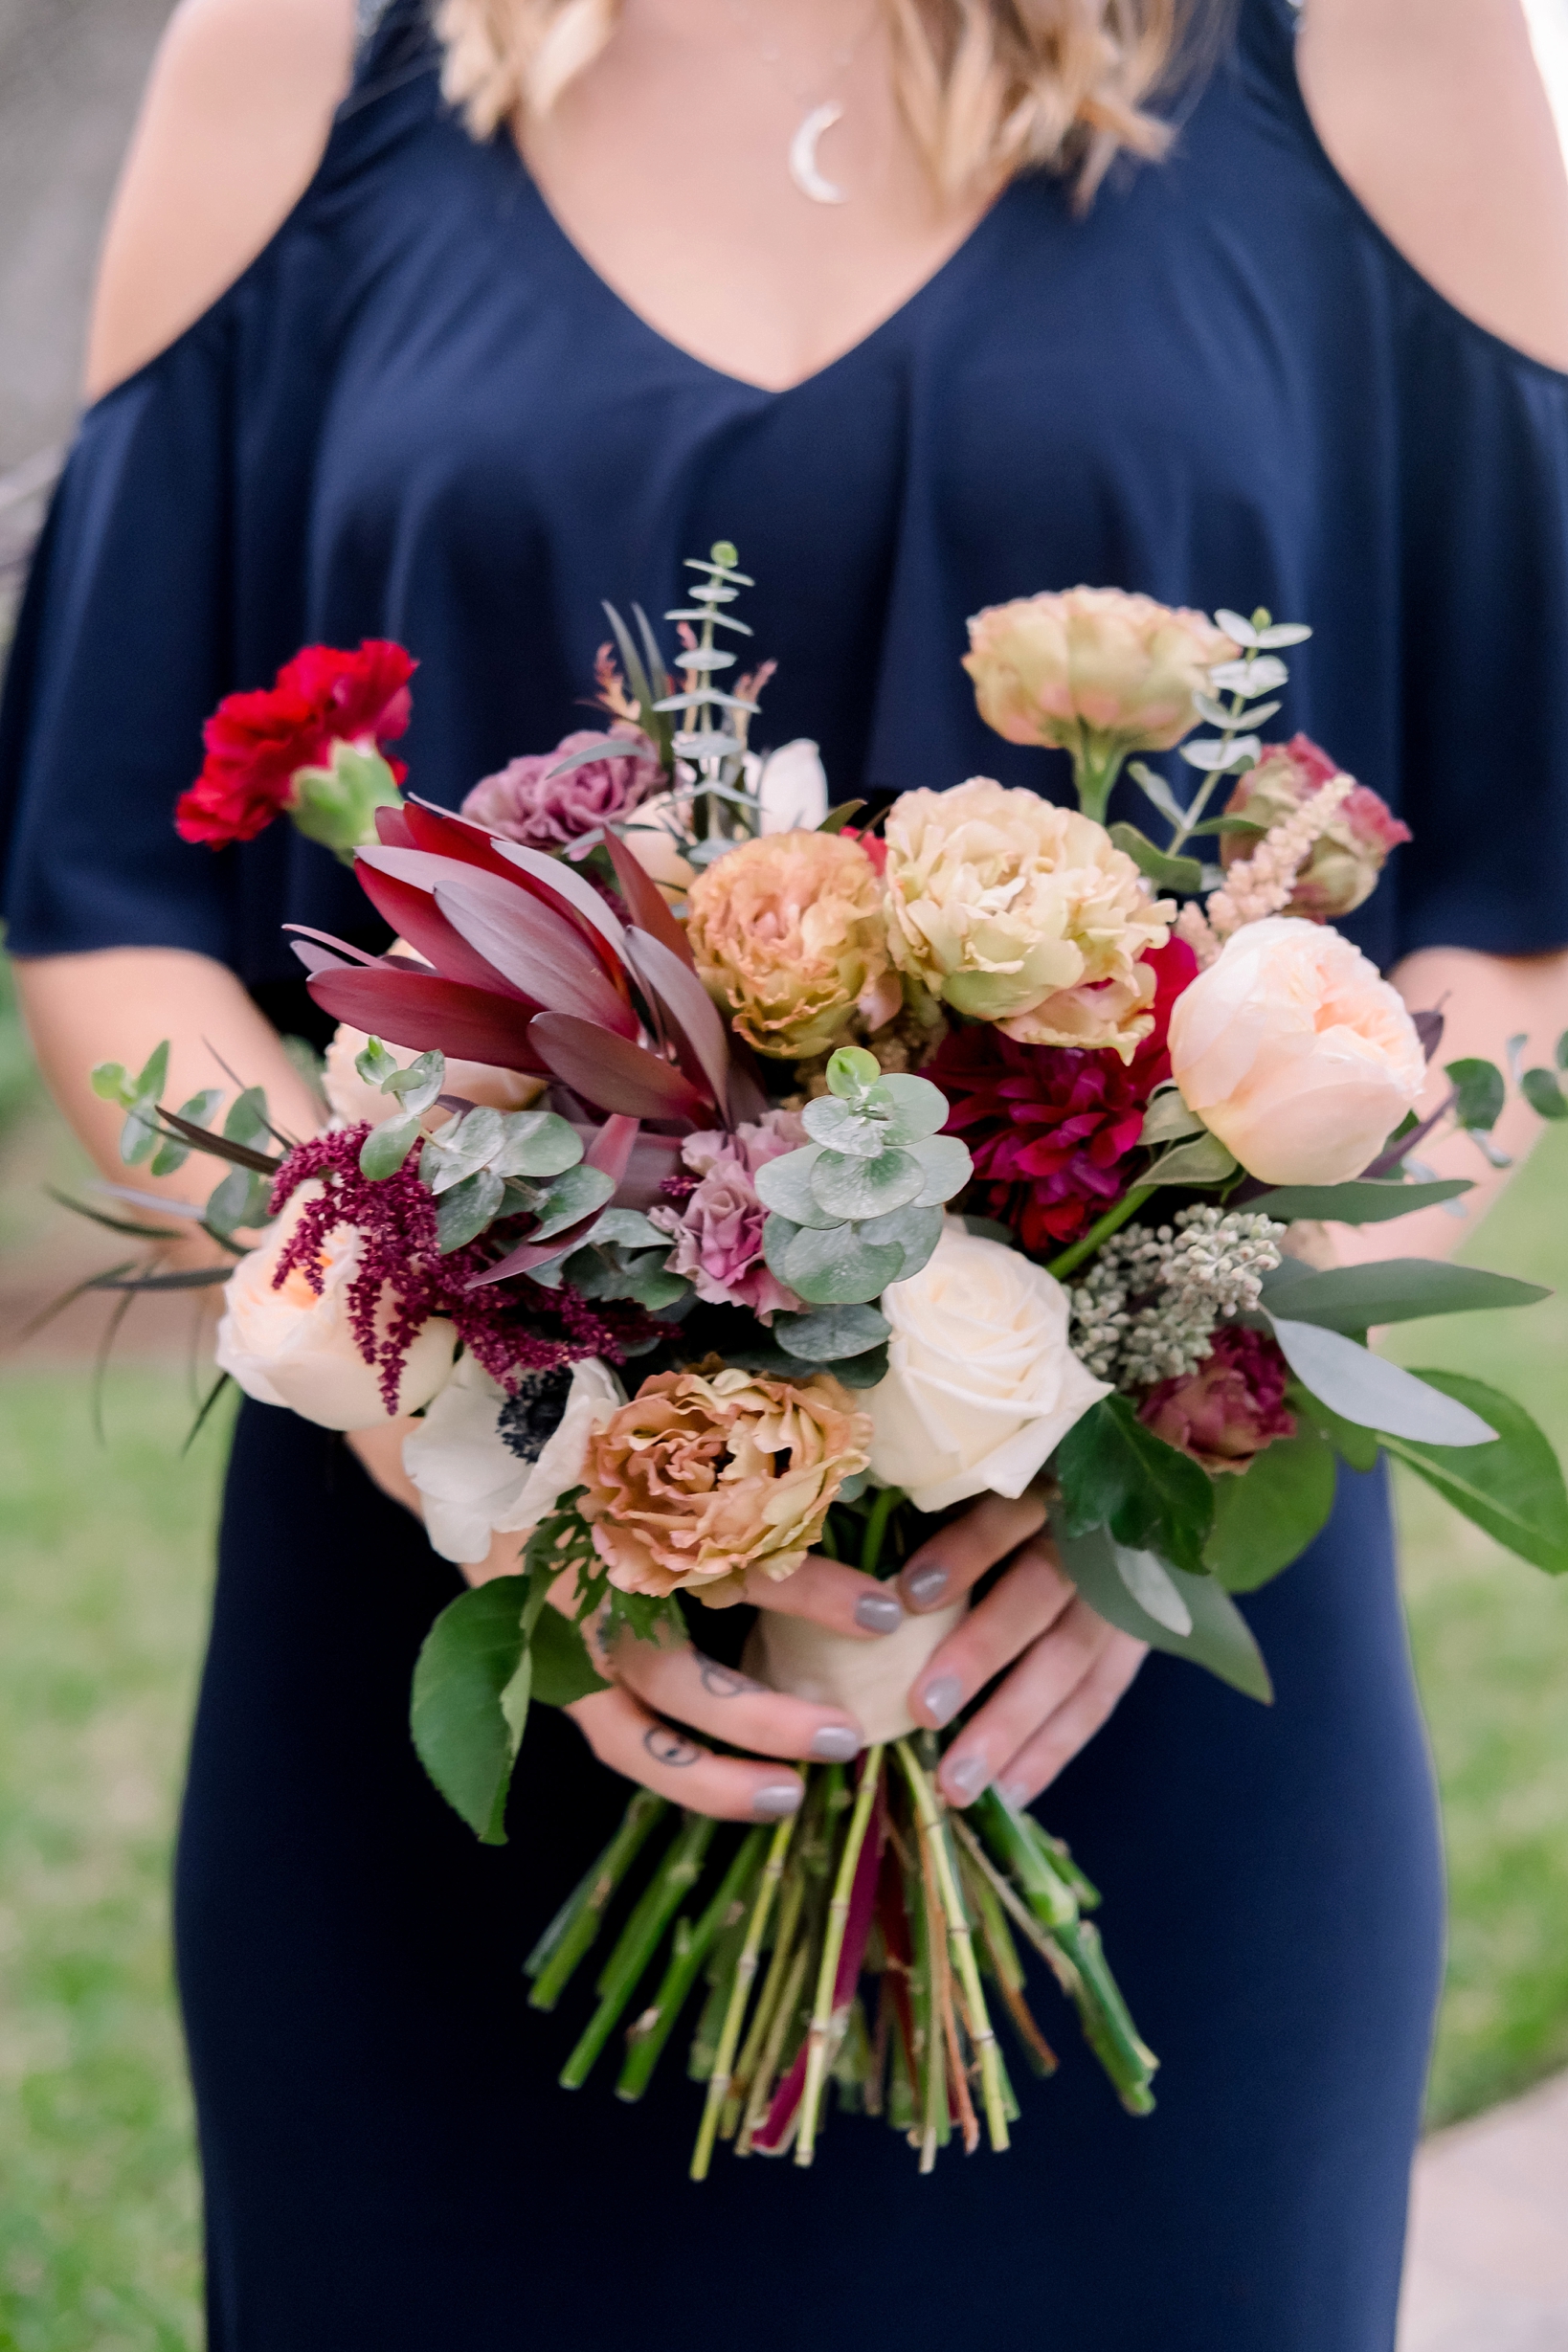 Maid of Honor holding her full bouquet of flowers against her Navy dress